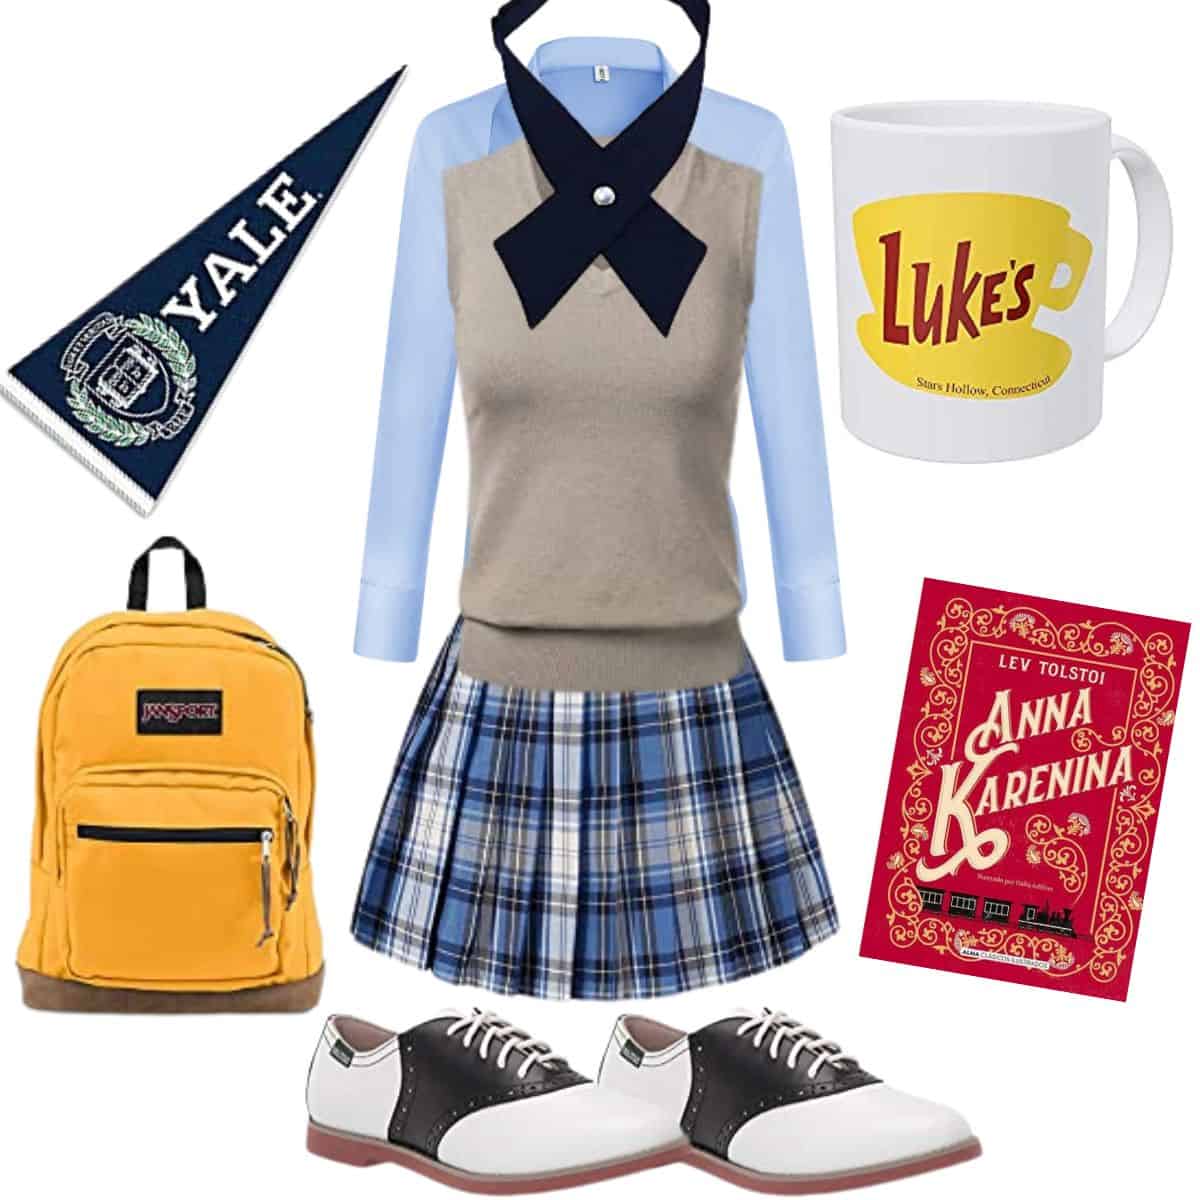 Best Rory Gilmore Chilton Uniform Costume: Cheap & Easy to DIY